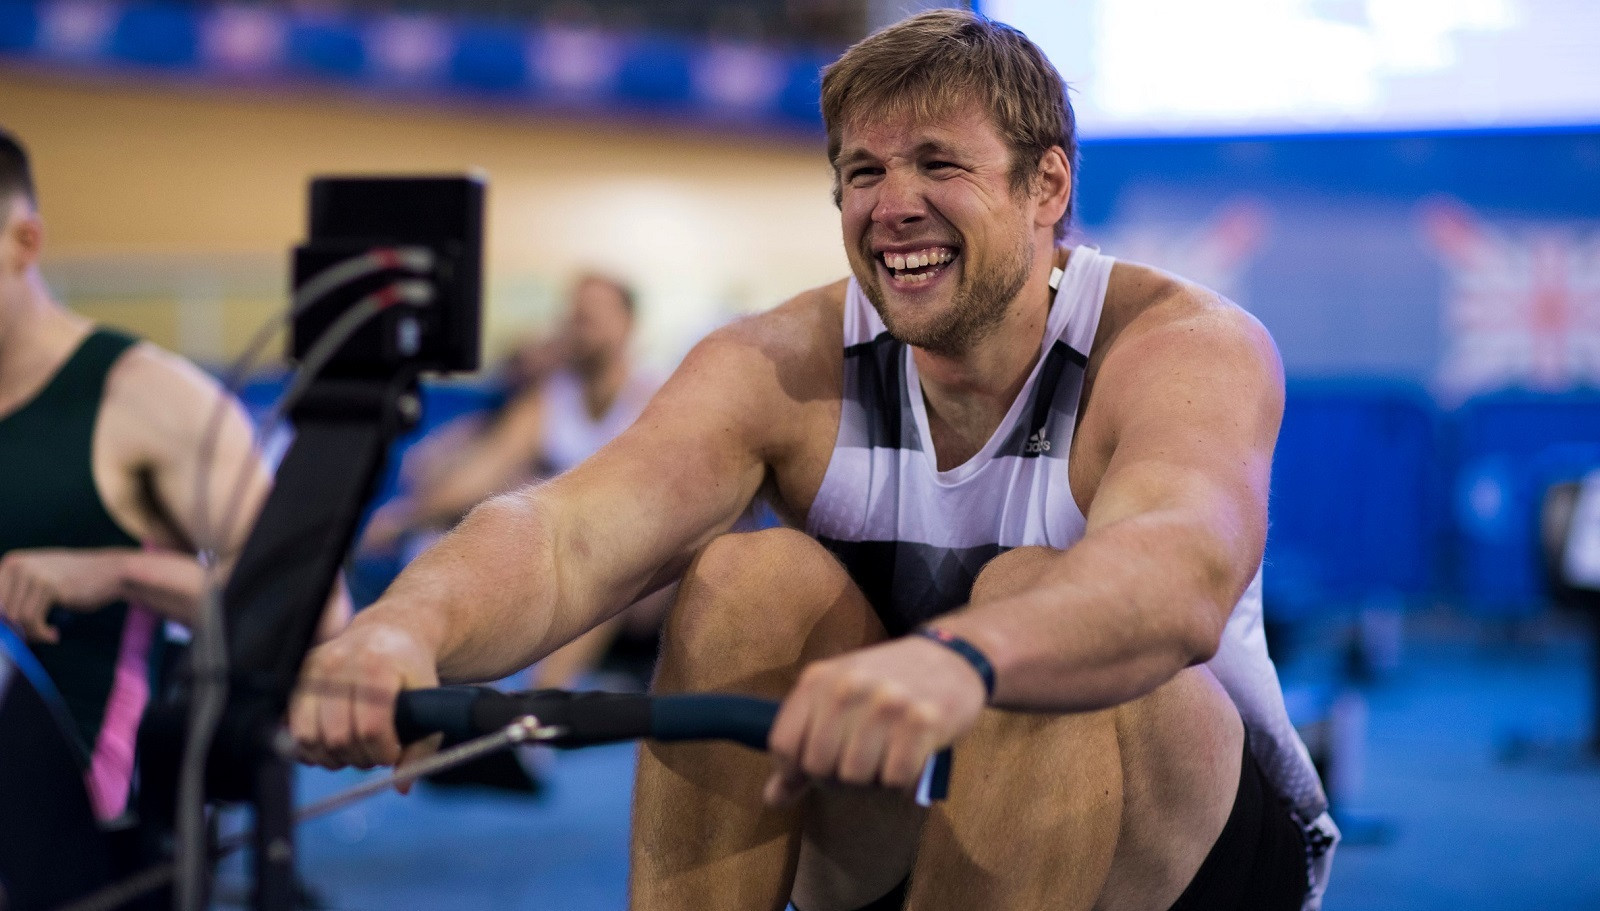 Clapp qualifies for 2021 World Rowing Indoor Championships with dominant 500m win